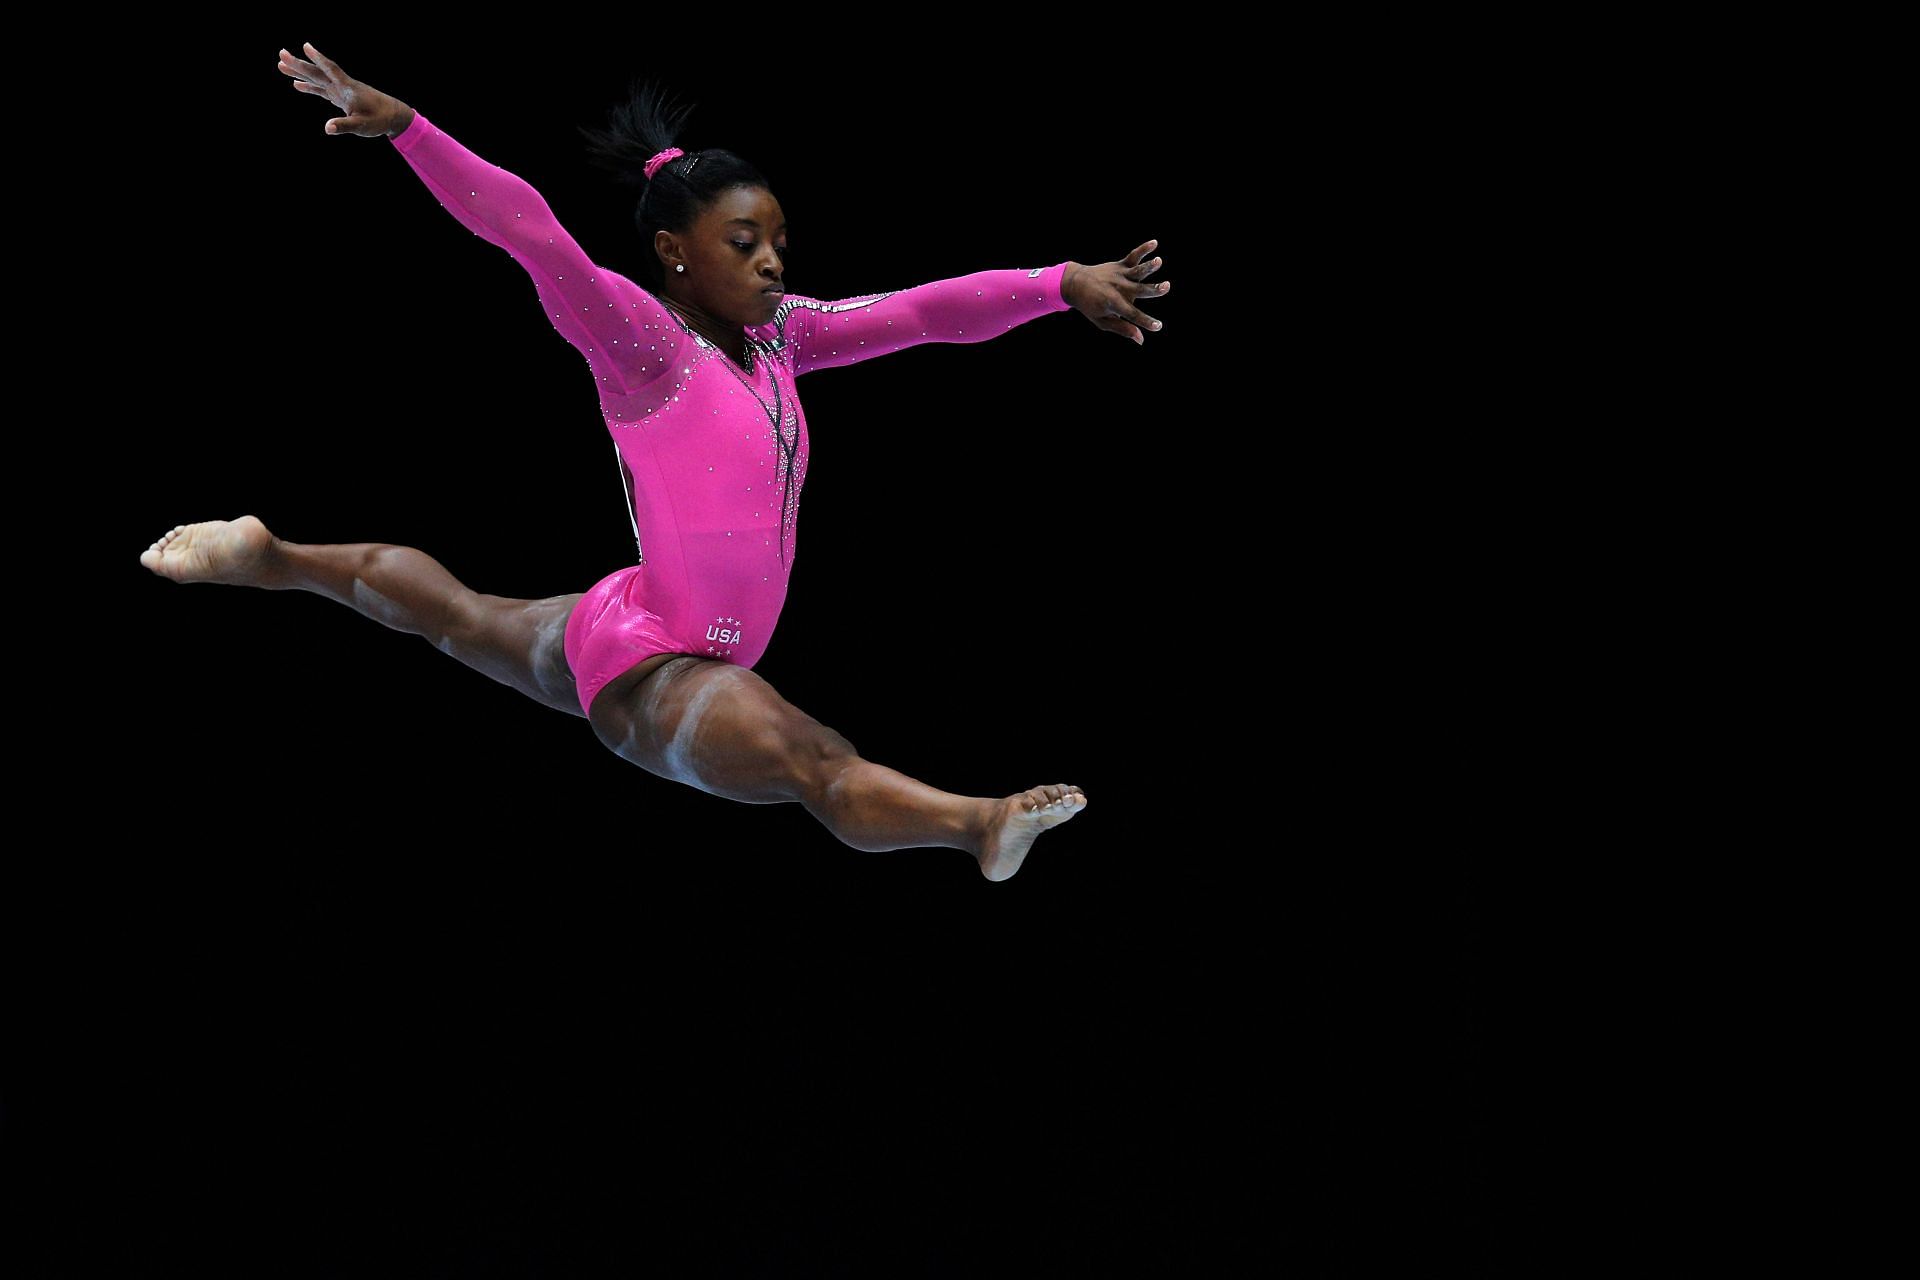 Simone Biles of USA competes in the Women&#039;s balance beam final on Day Seven of the Artistic Gymnastics World Championships Belgium 2013 held at the Antwerp Sports Palace on October 6, 2013 in Antwerpen, Belgium. (Photo by Dean Mouhtaropoulos/Getty Images)